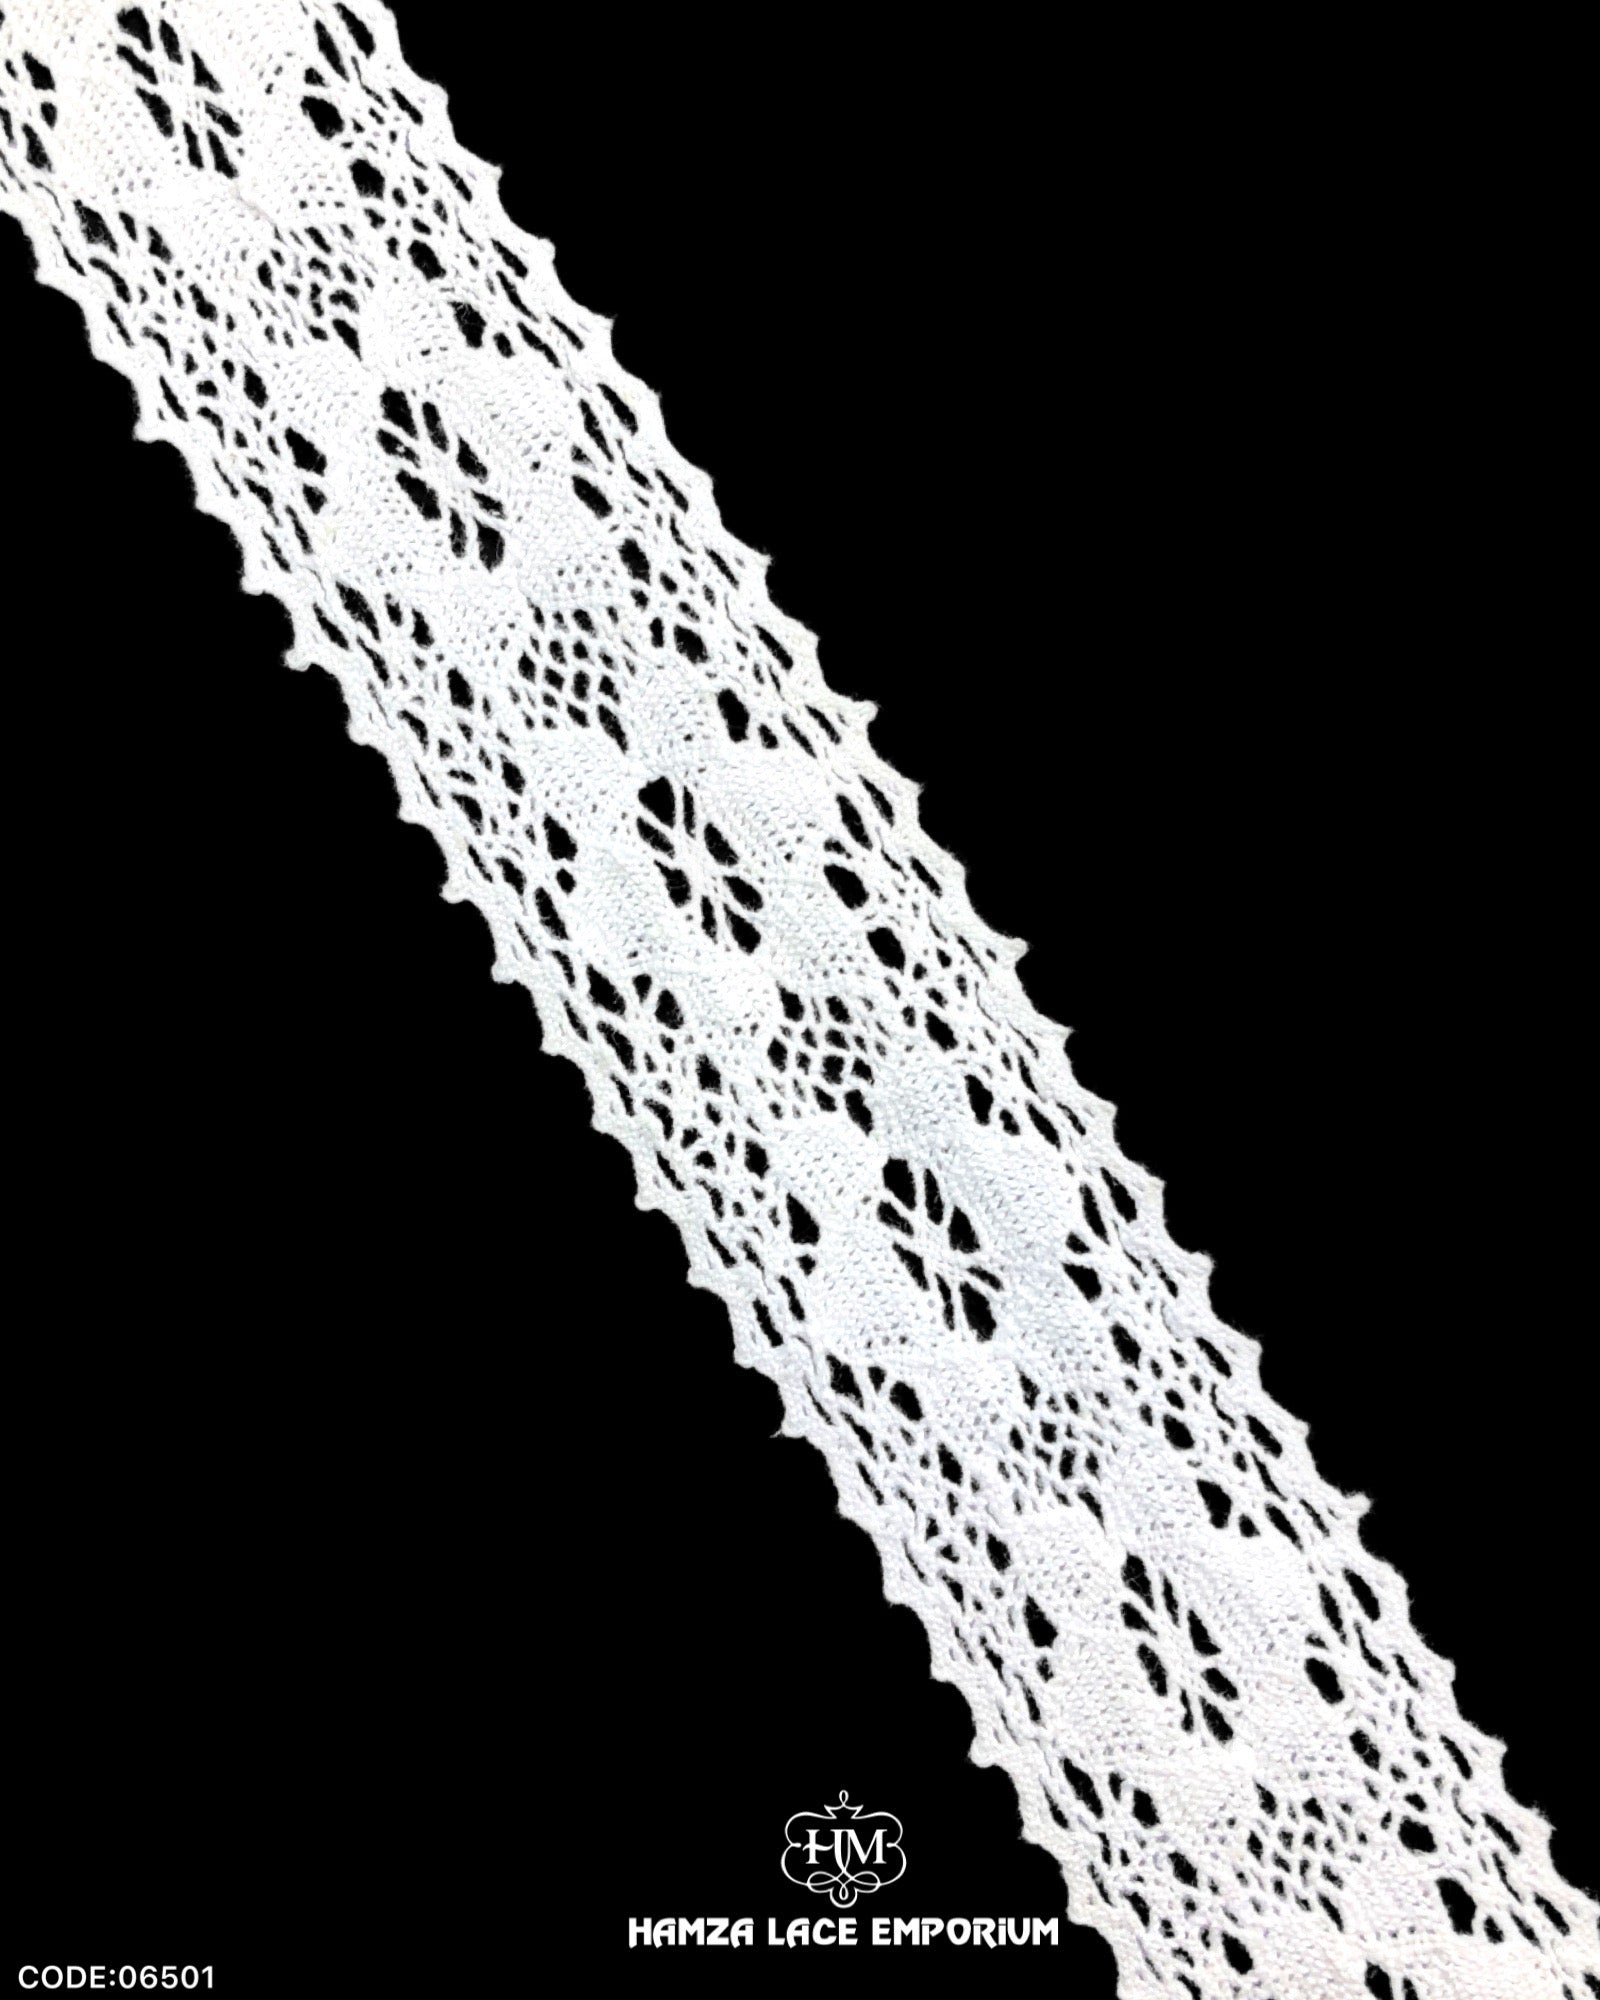 'Center Filling Crochet Lace 06501' with the name 'Hamza Lace' written at the bottom